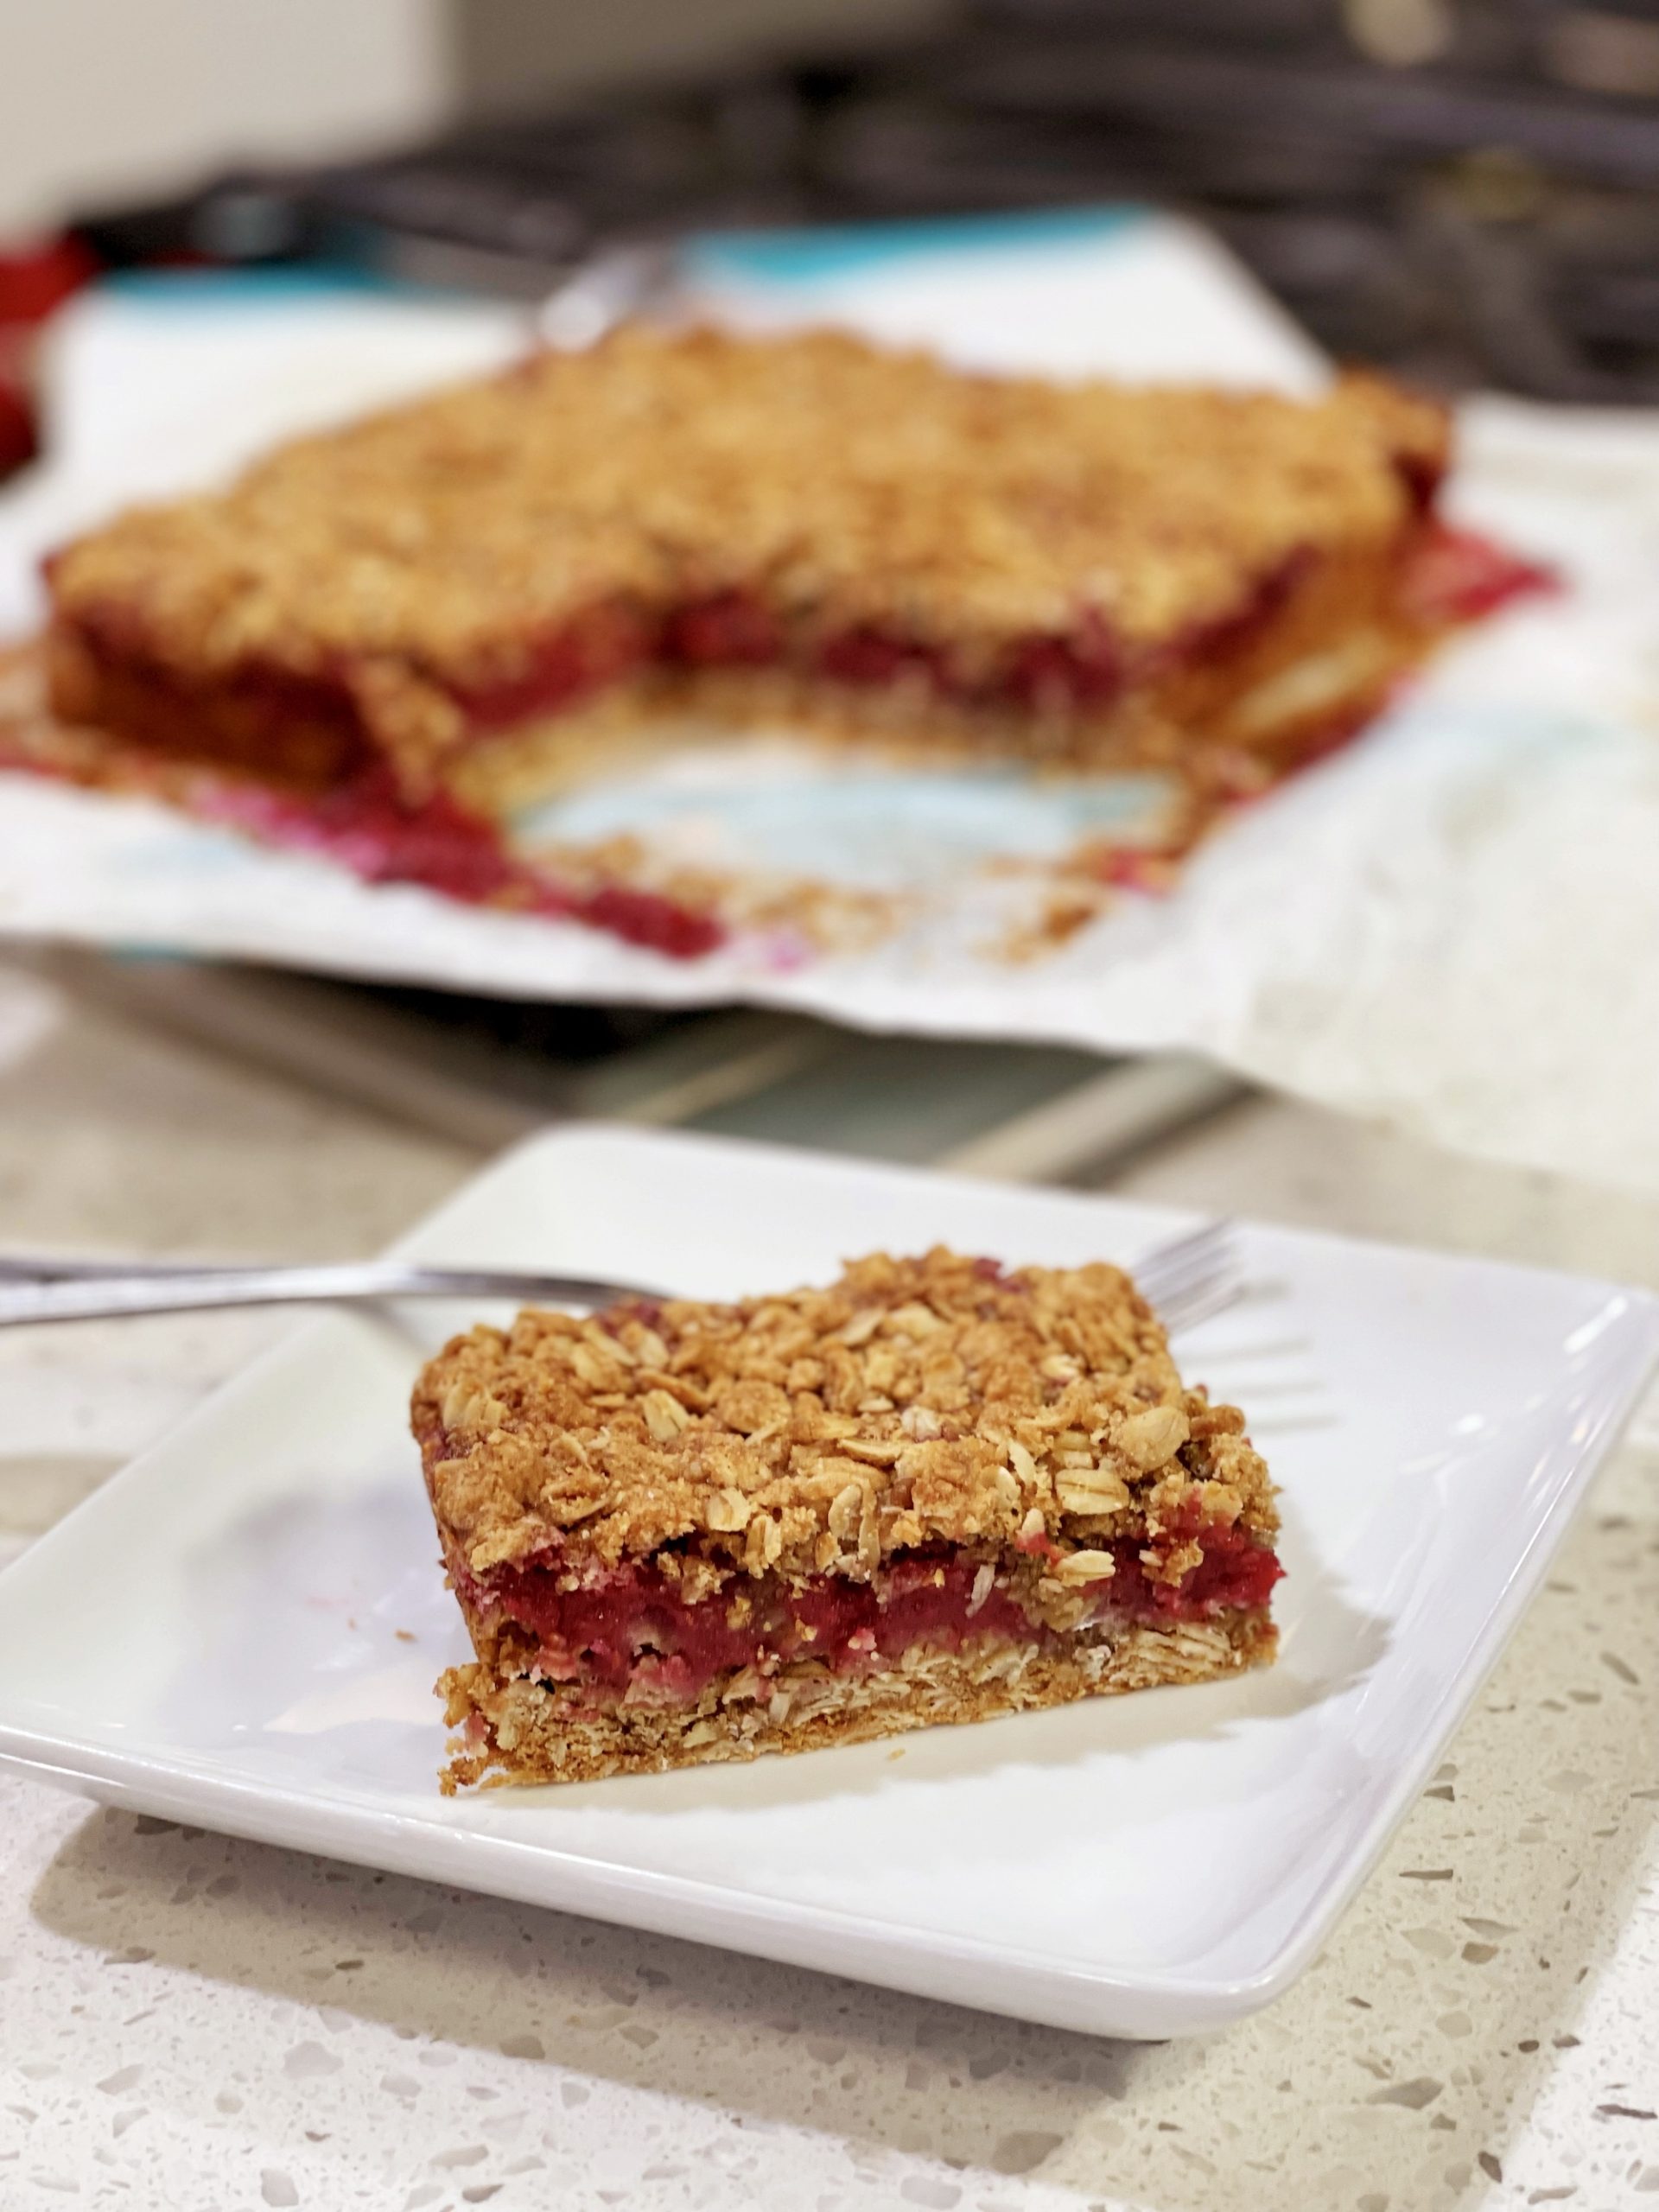 Raspberry Oatmeal Cookie Bars - cooking with chef bryan